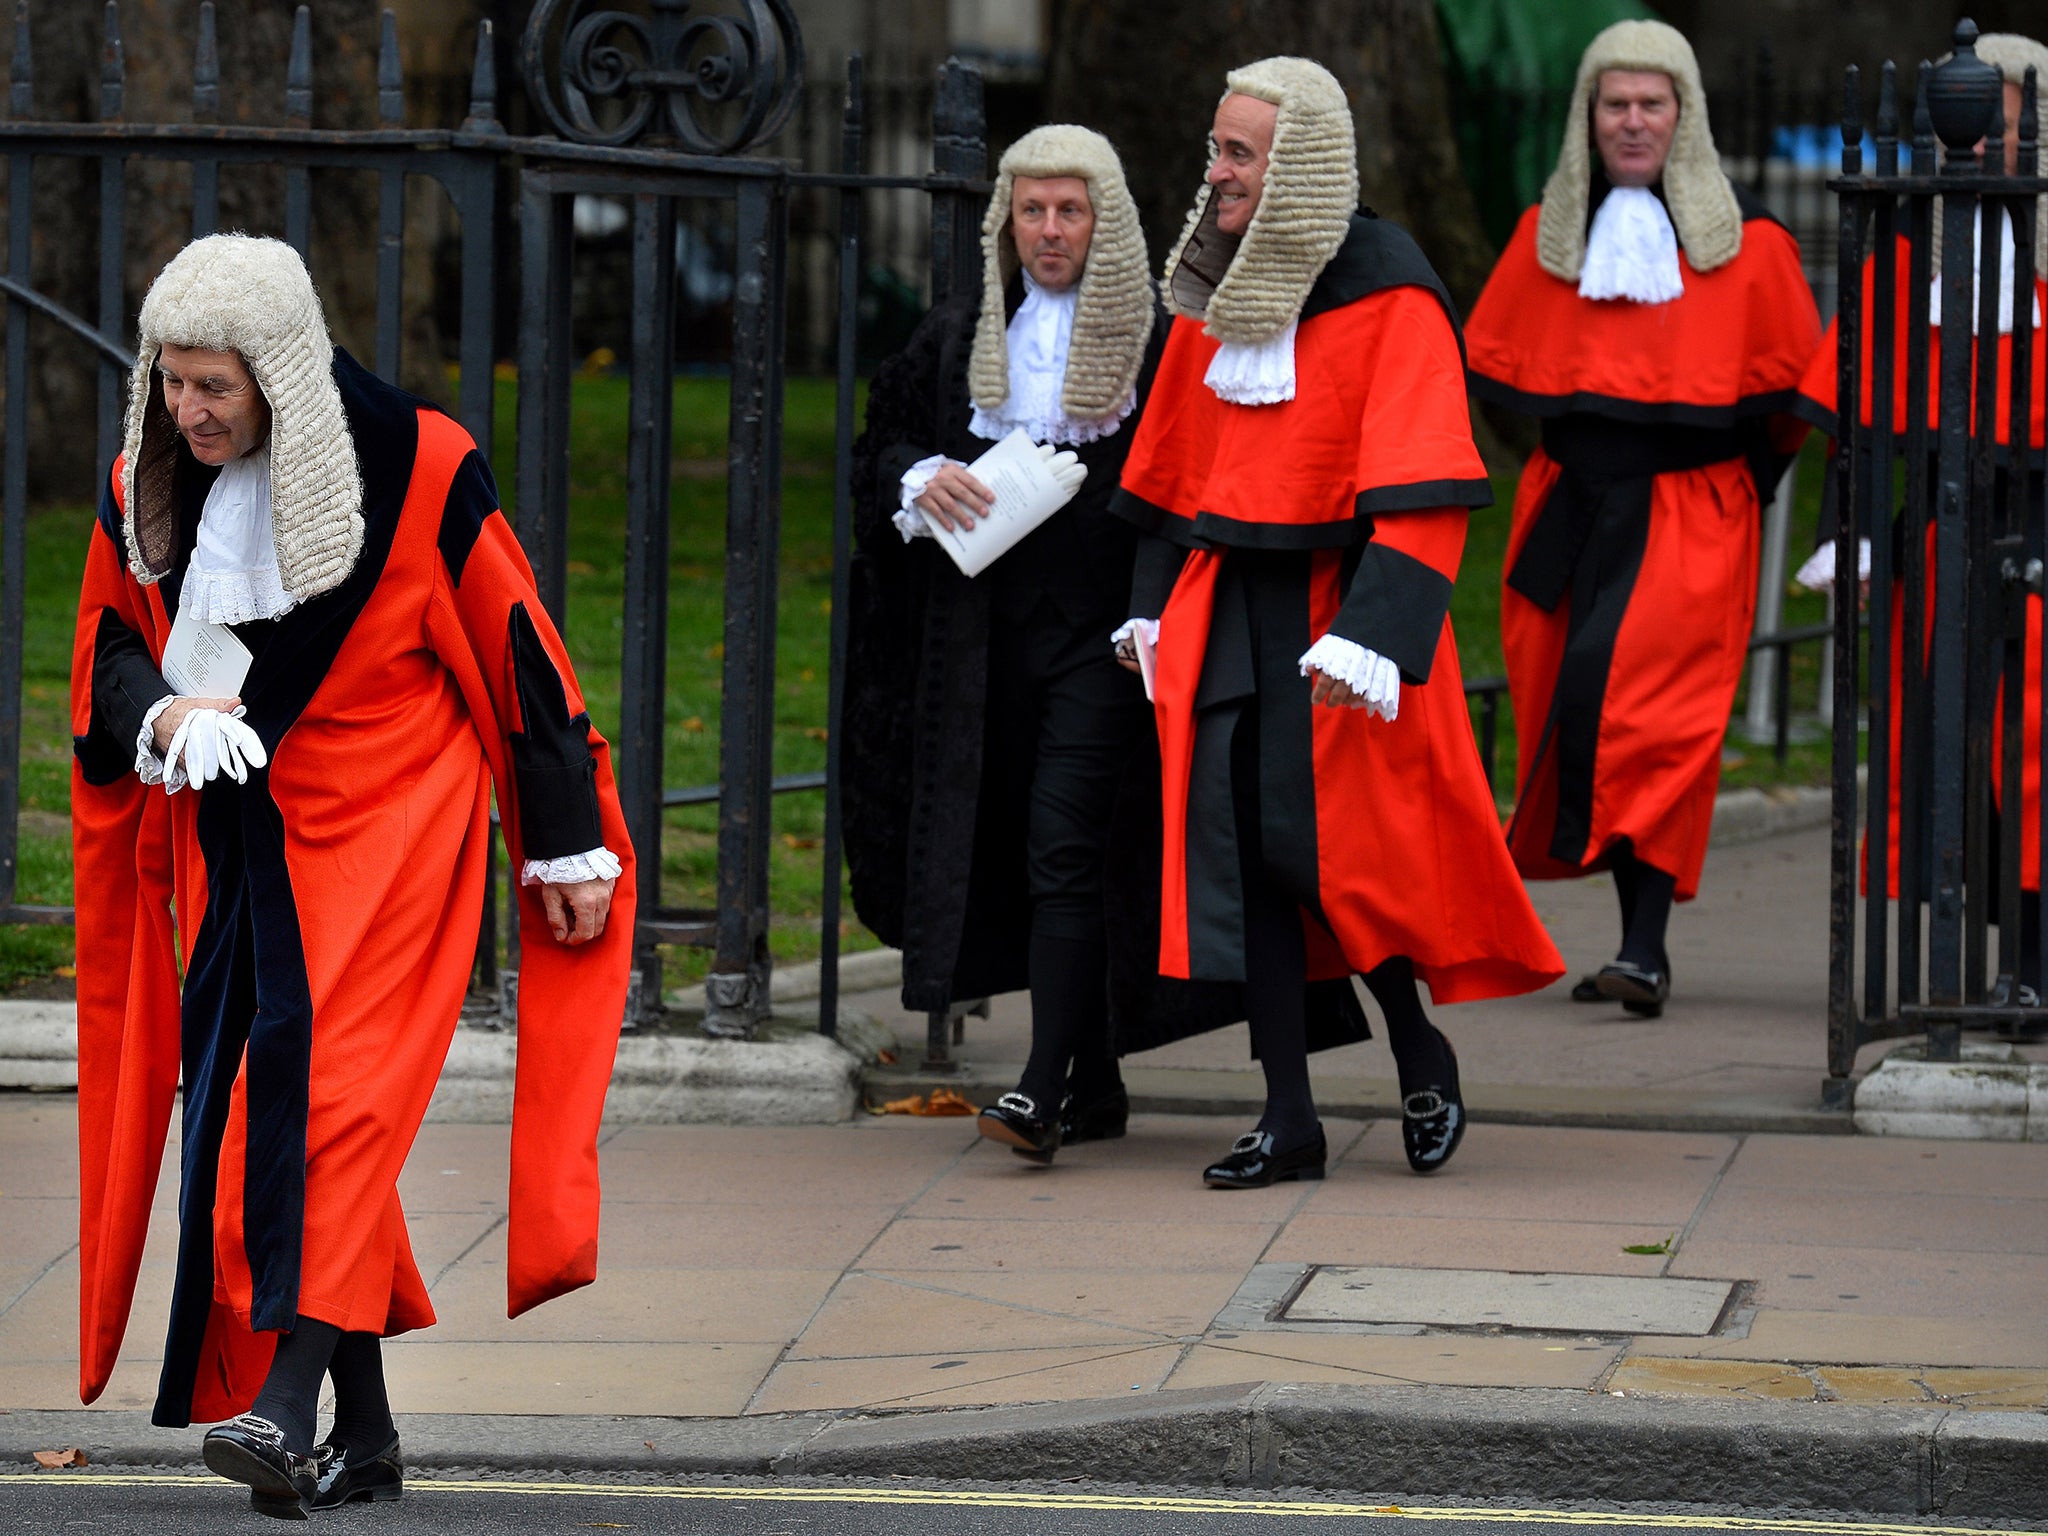 Lord Carlile said judges lack the necessary knowledge to oversee surveillance warrants